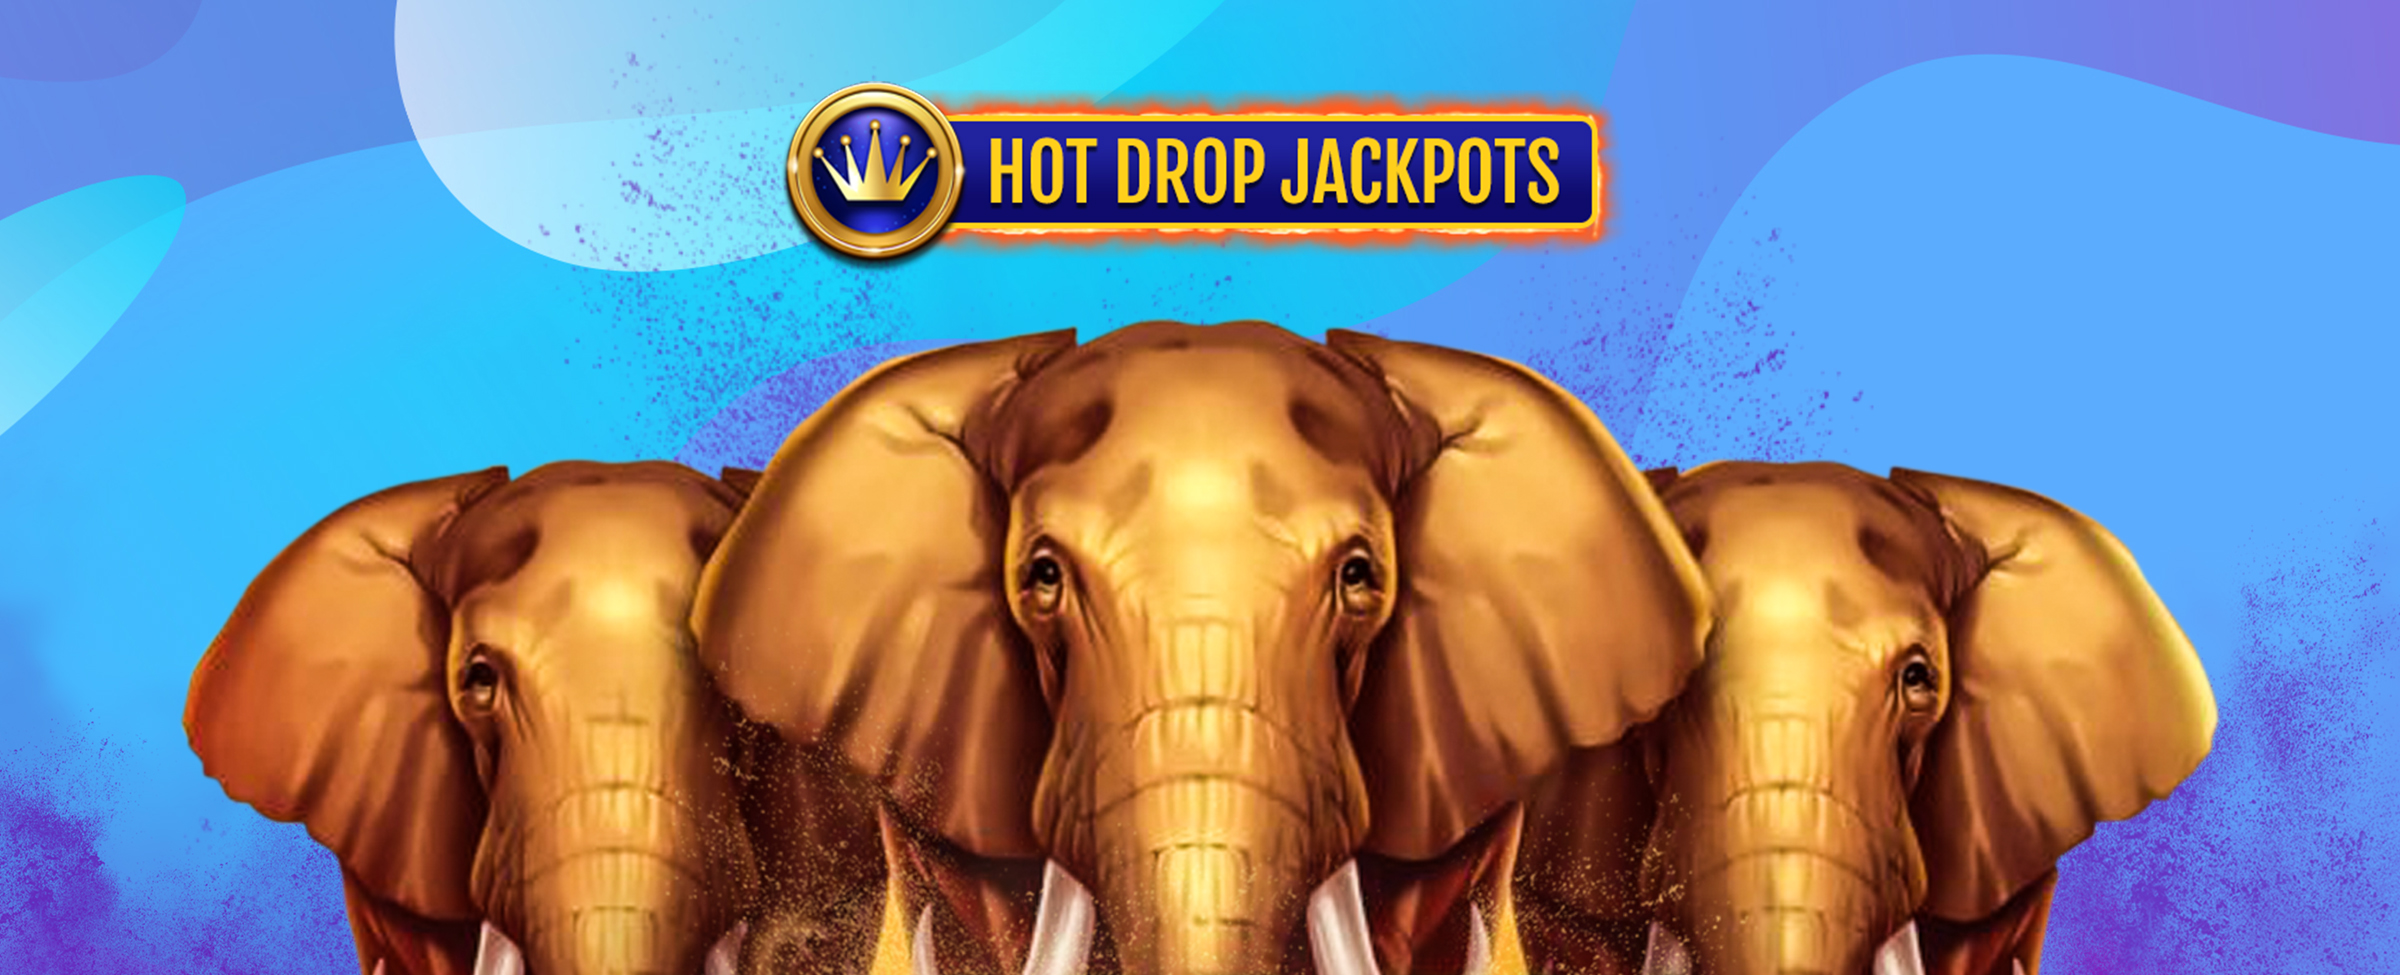 Three 3D-illustrated elephants stand close to each other, depicted from the shoulders up, staring front on. Above, is the SlotsLV Hot Drop Jackpots logo - a blue circle with a gold crown, with a rectangular frame that’s on fire with the words “Hot Drop Jackpots” within. Behind is a multi-tone blue abstract background.